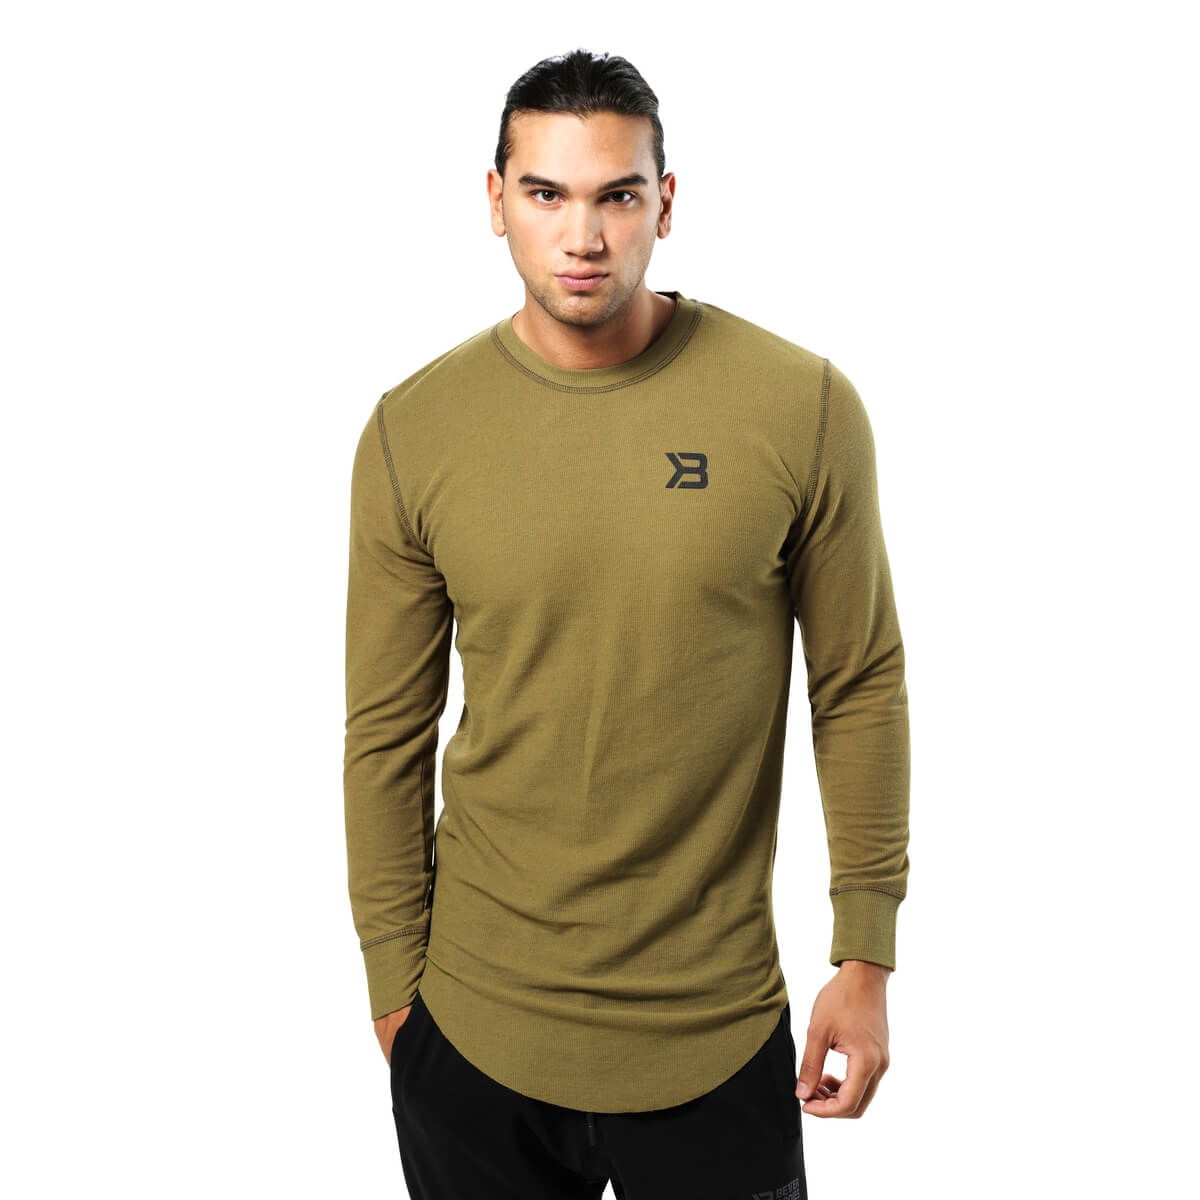 Harlem Thermal L/S, military green, Better Bodies